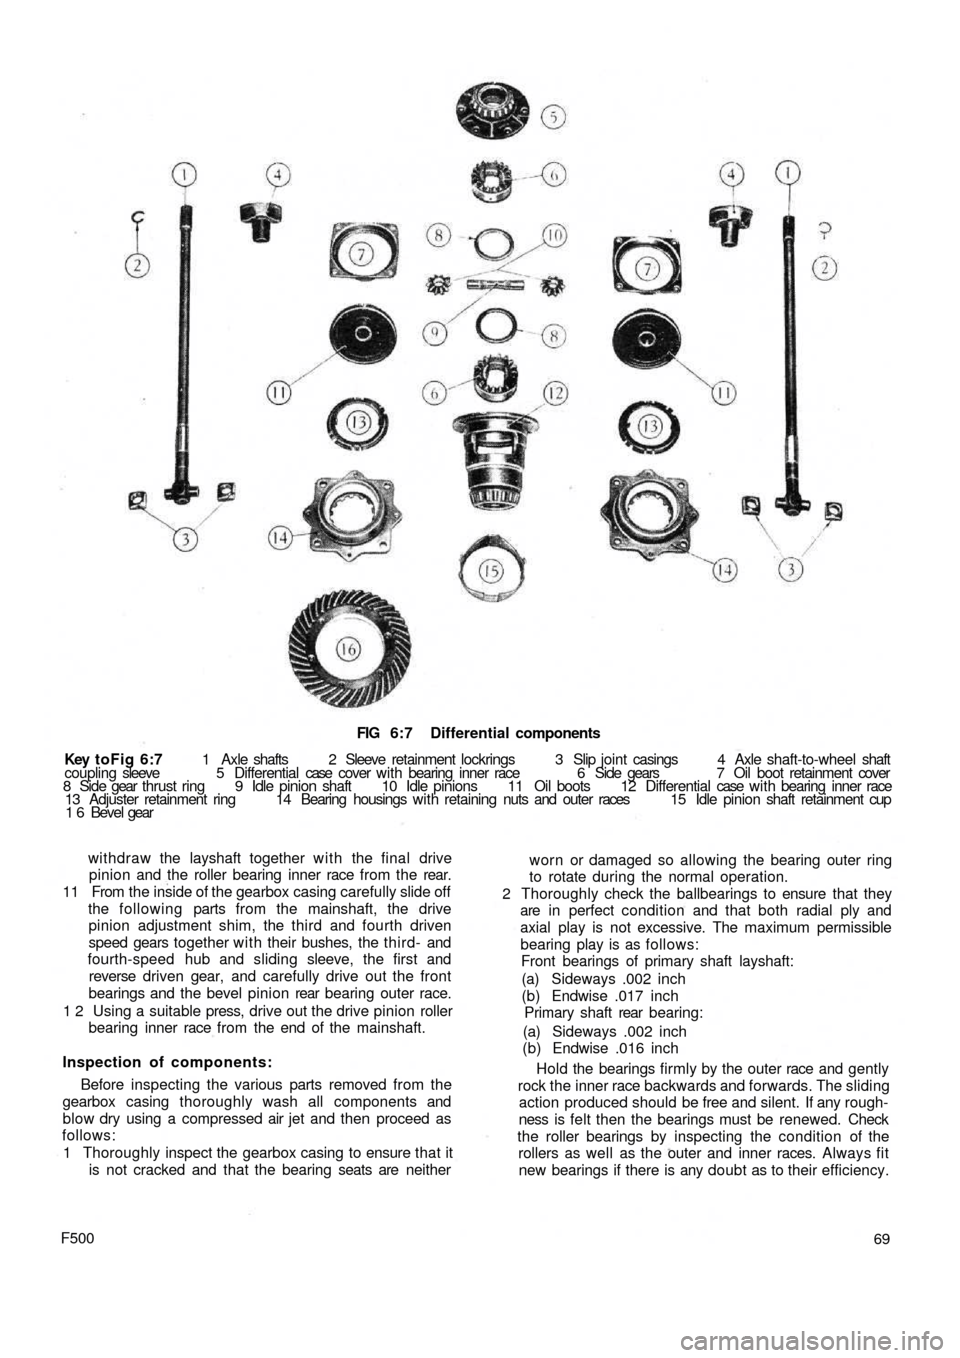 FIAT 500 1970 1.G Workshop Manual FIG 6:7  Differential components
Key toFig  6:7 1  Axle  shafts  2  Sleeve  retainment  lockrings   3   Slip  joint casings  4  Axle  shaft-to-wheel shaft
coupling sleeve  5  Differential case  cover 